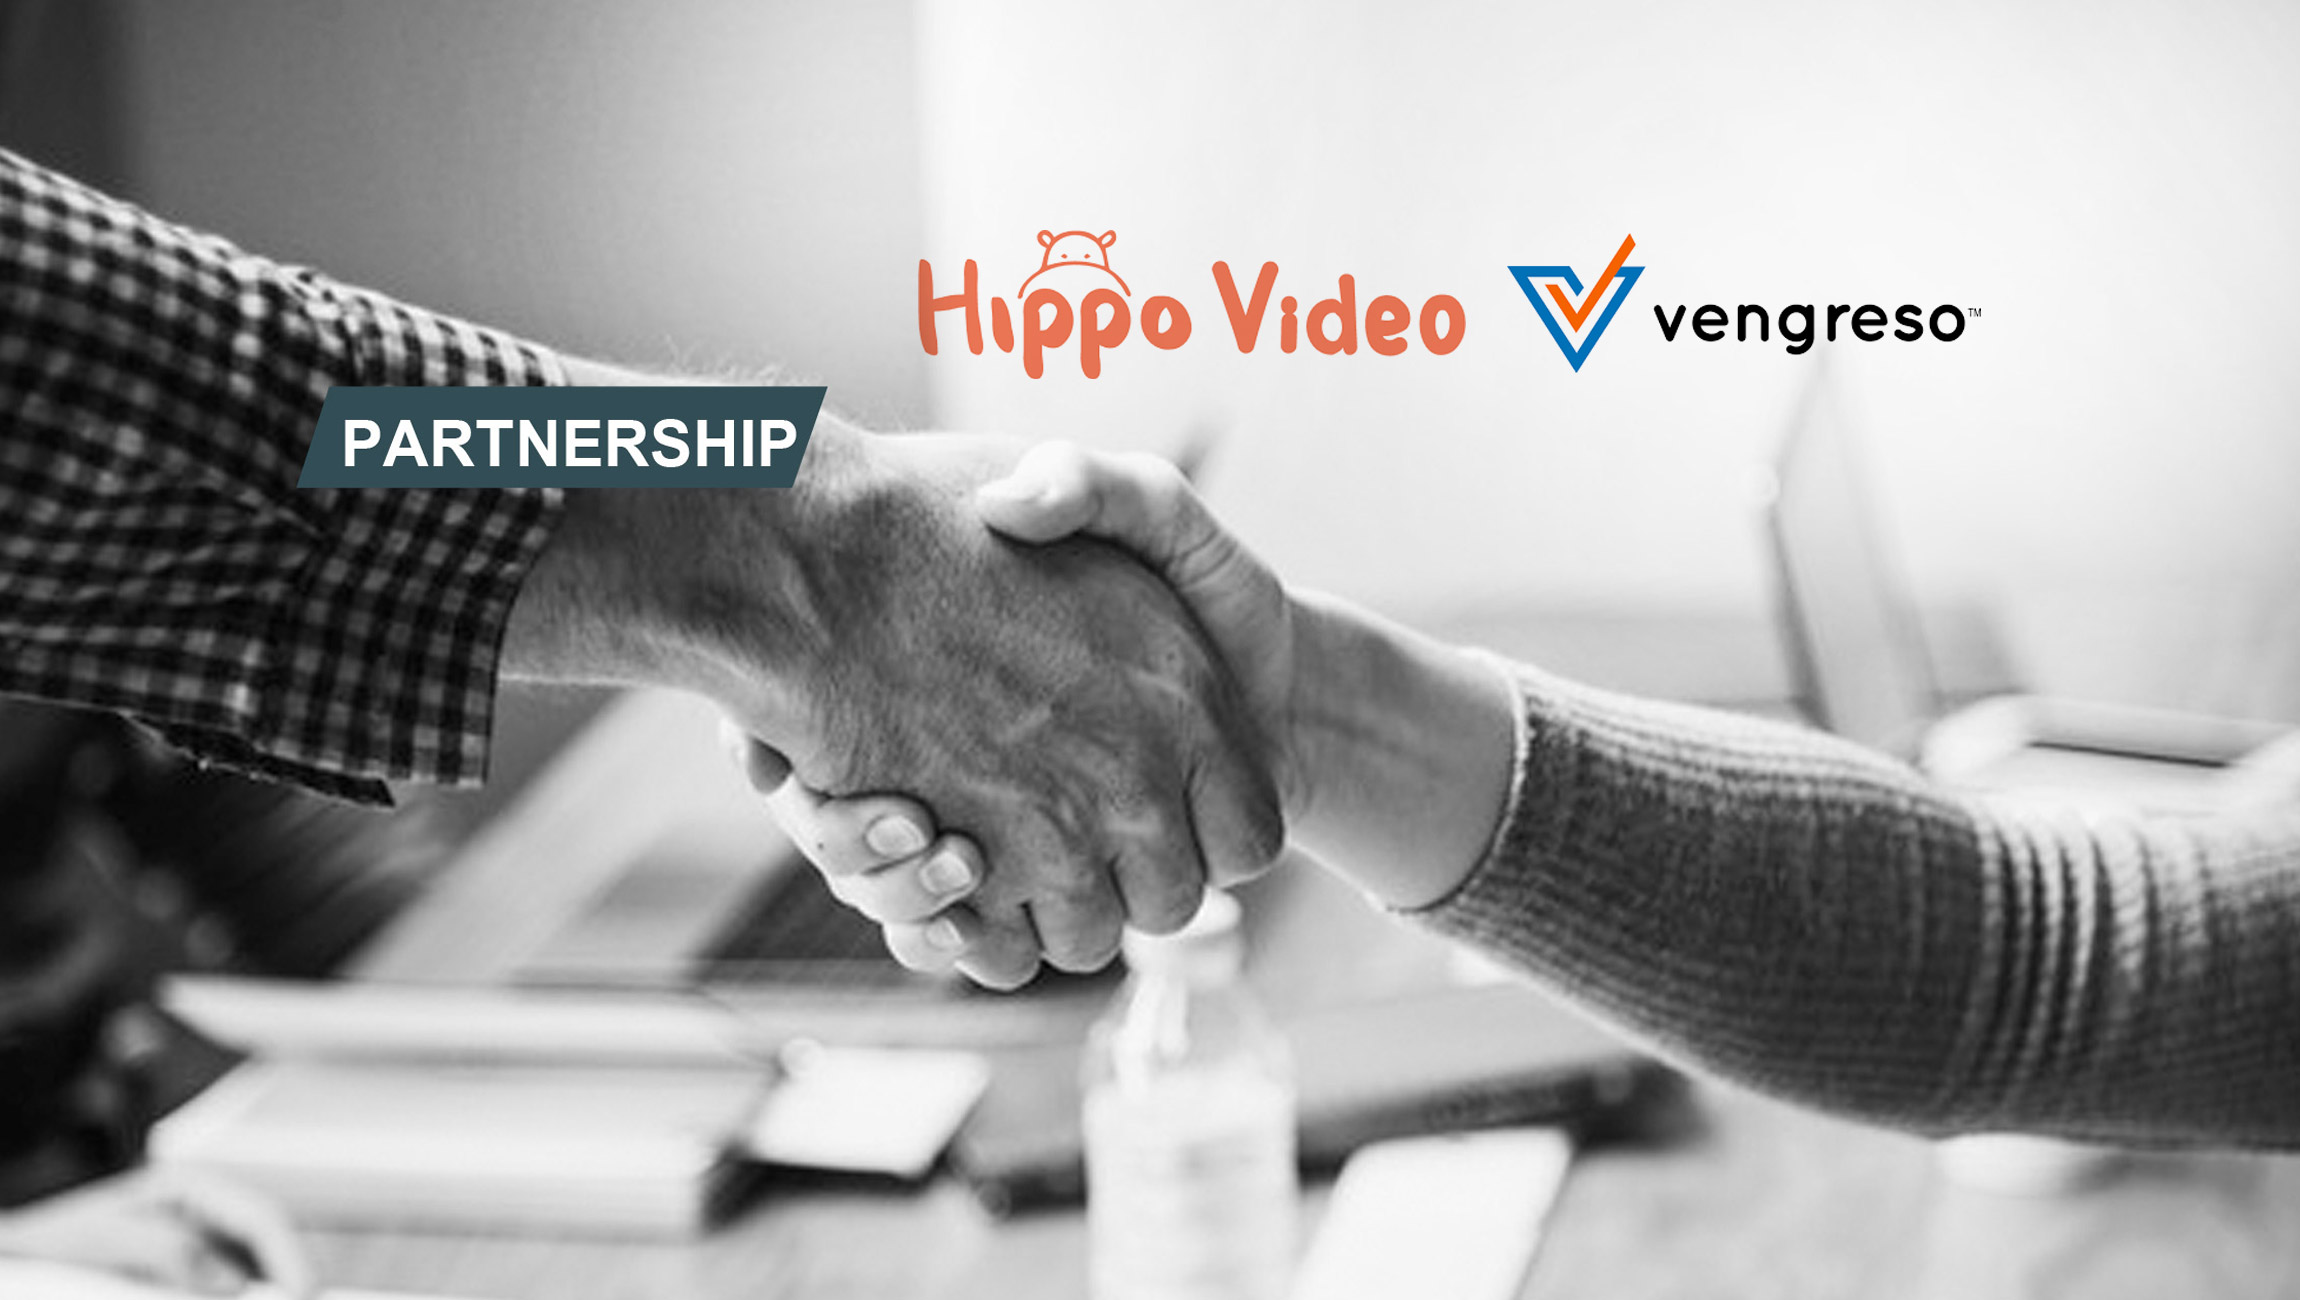 Hippo Video and Vengreso Partner To Power Virtual Selling With Video for B2B Sales Teams